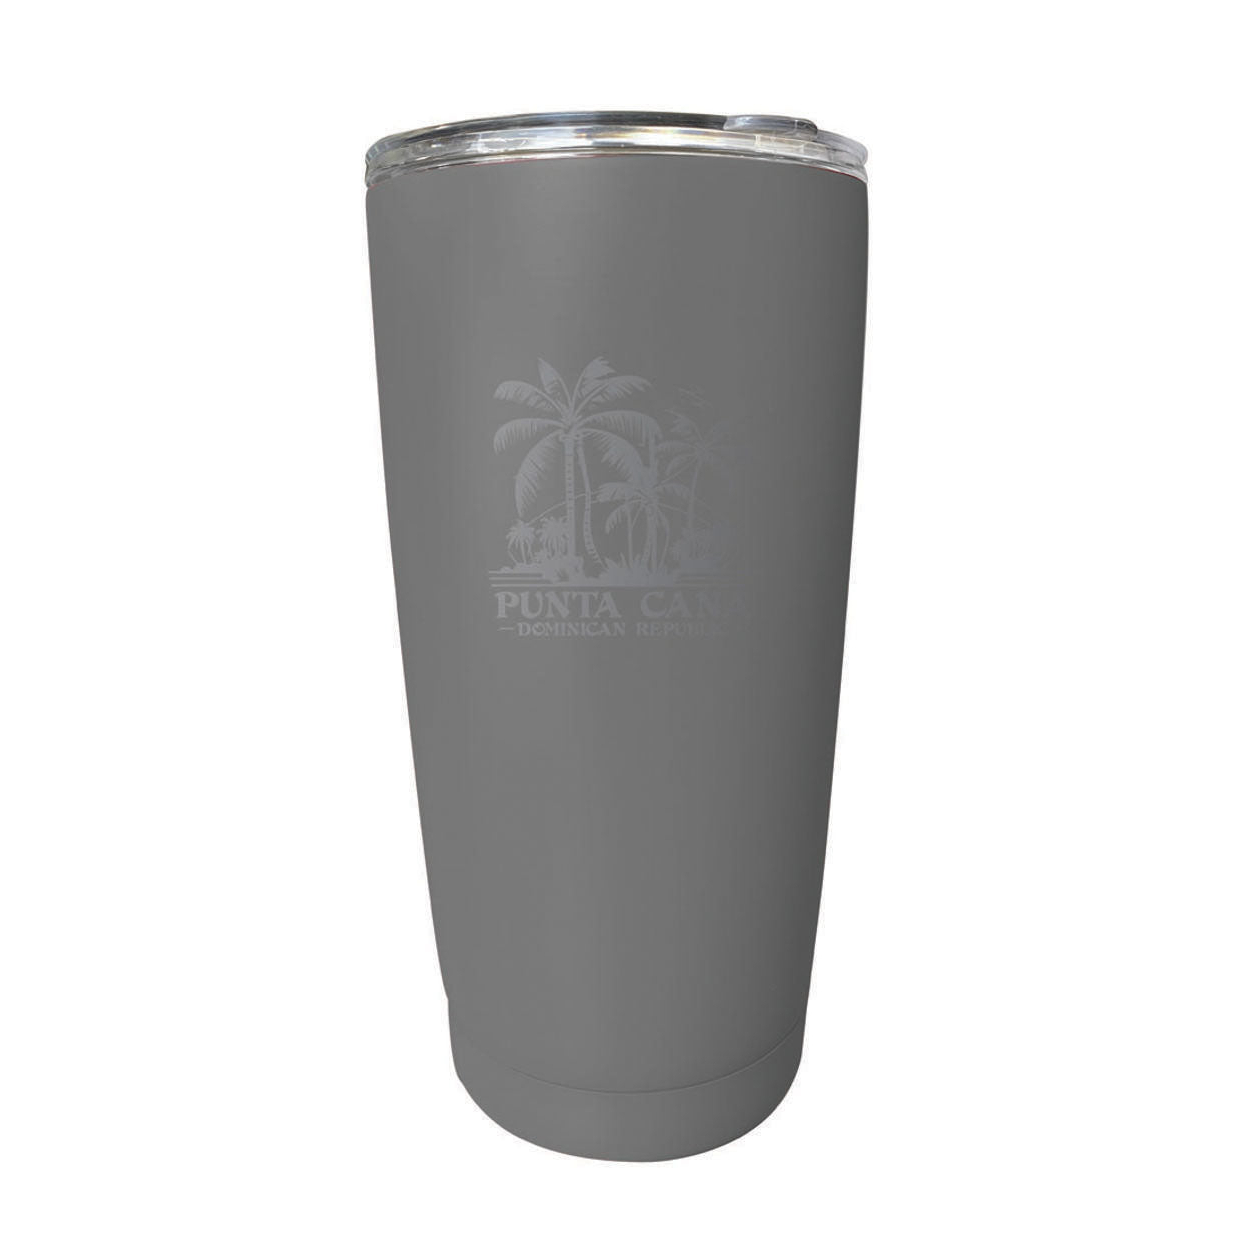 Punta Cana Dominican Republic Souvenir 16 Oz Stainless Steel Insulated Tumbler Etched - Gray, PALMS